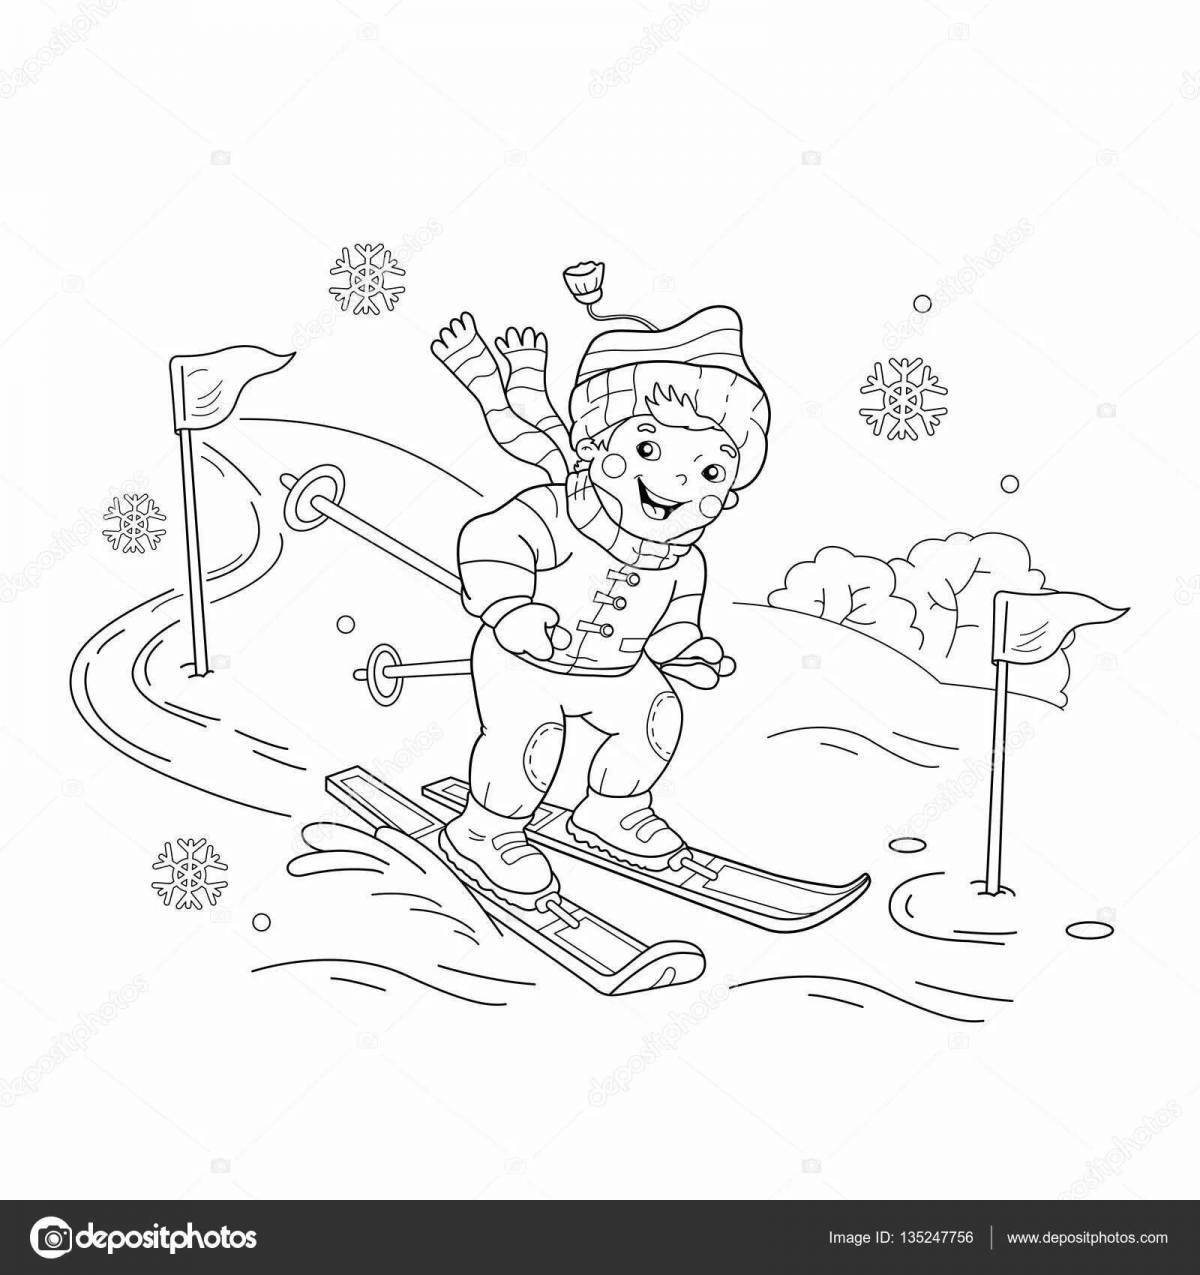 Courageous skier coloring book for 6-7 year olds